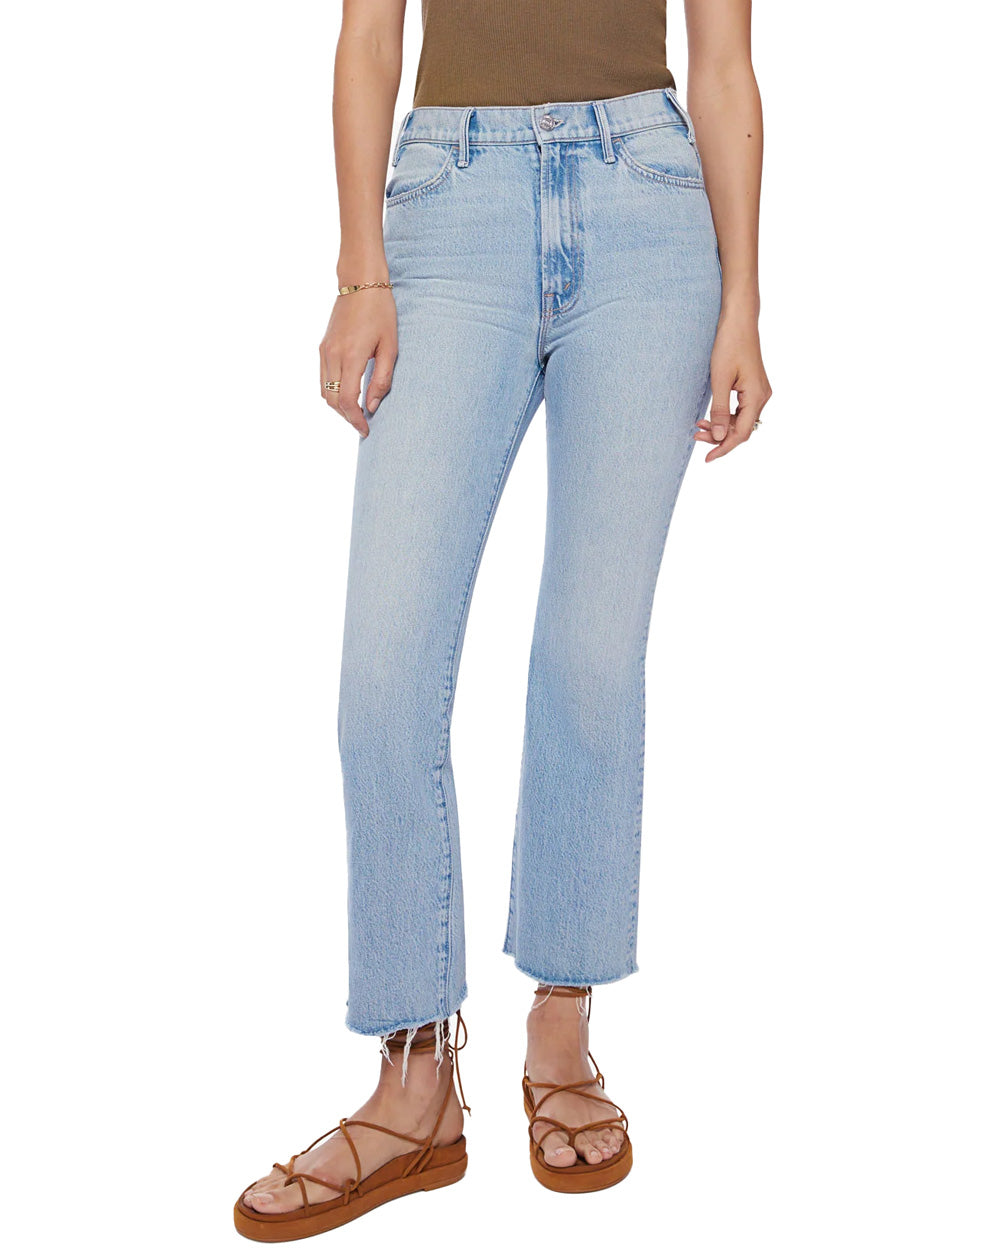 The Huster Ankle Fray Jean in Home On The Range